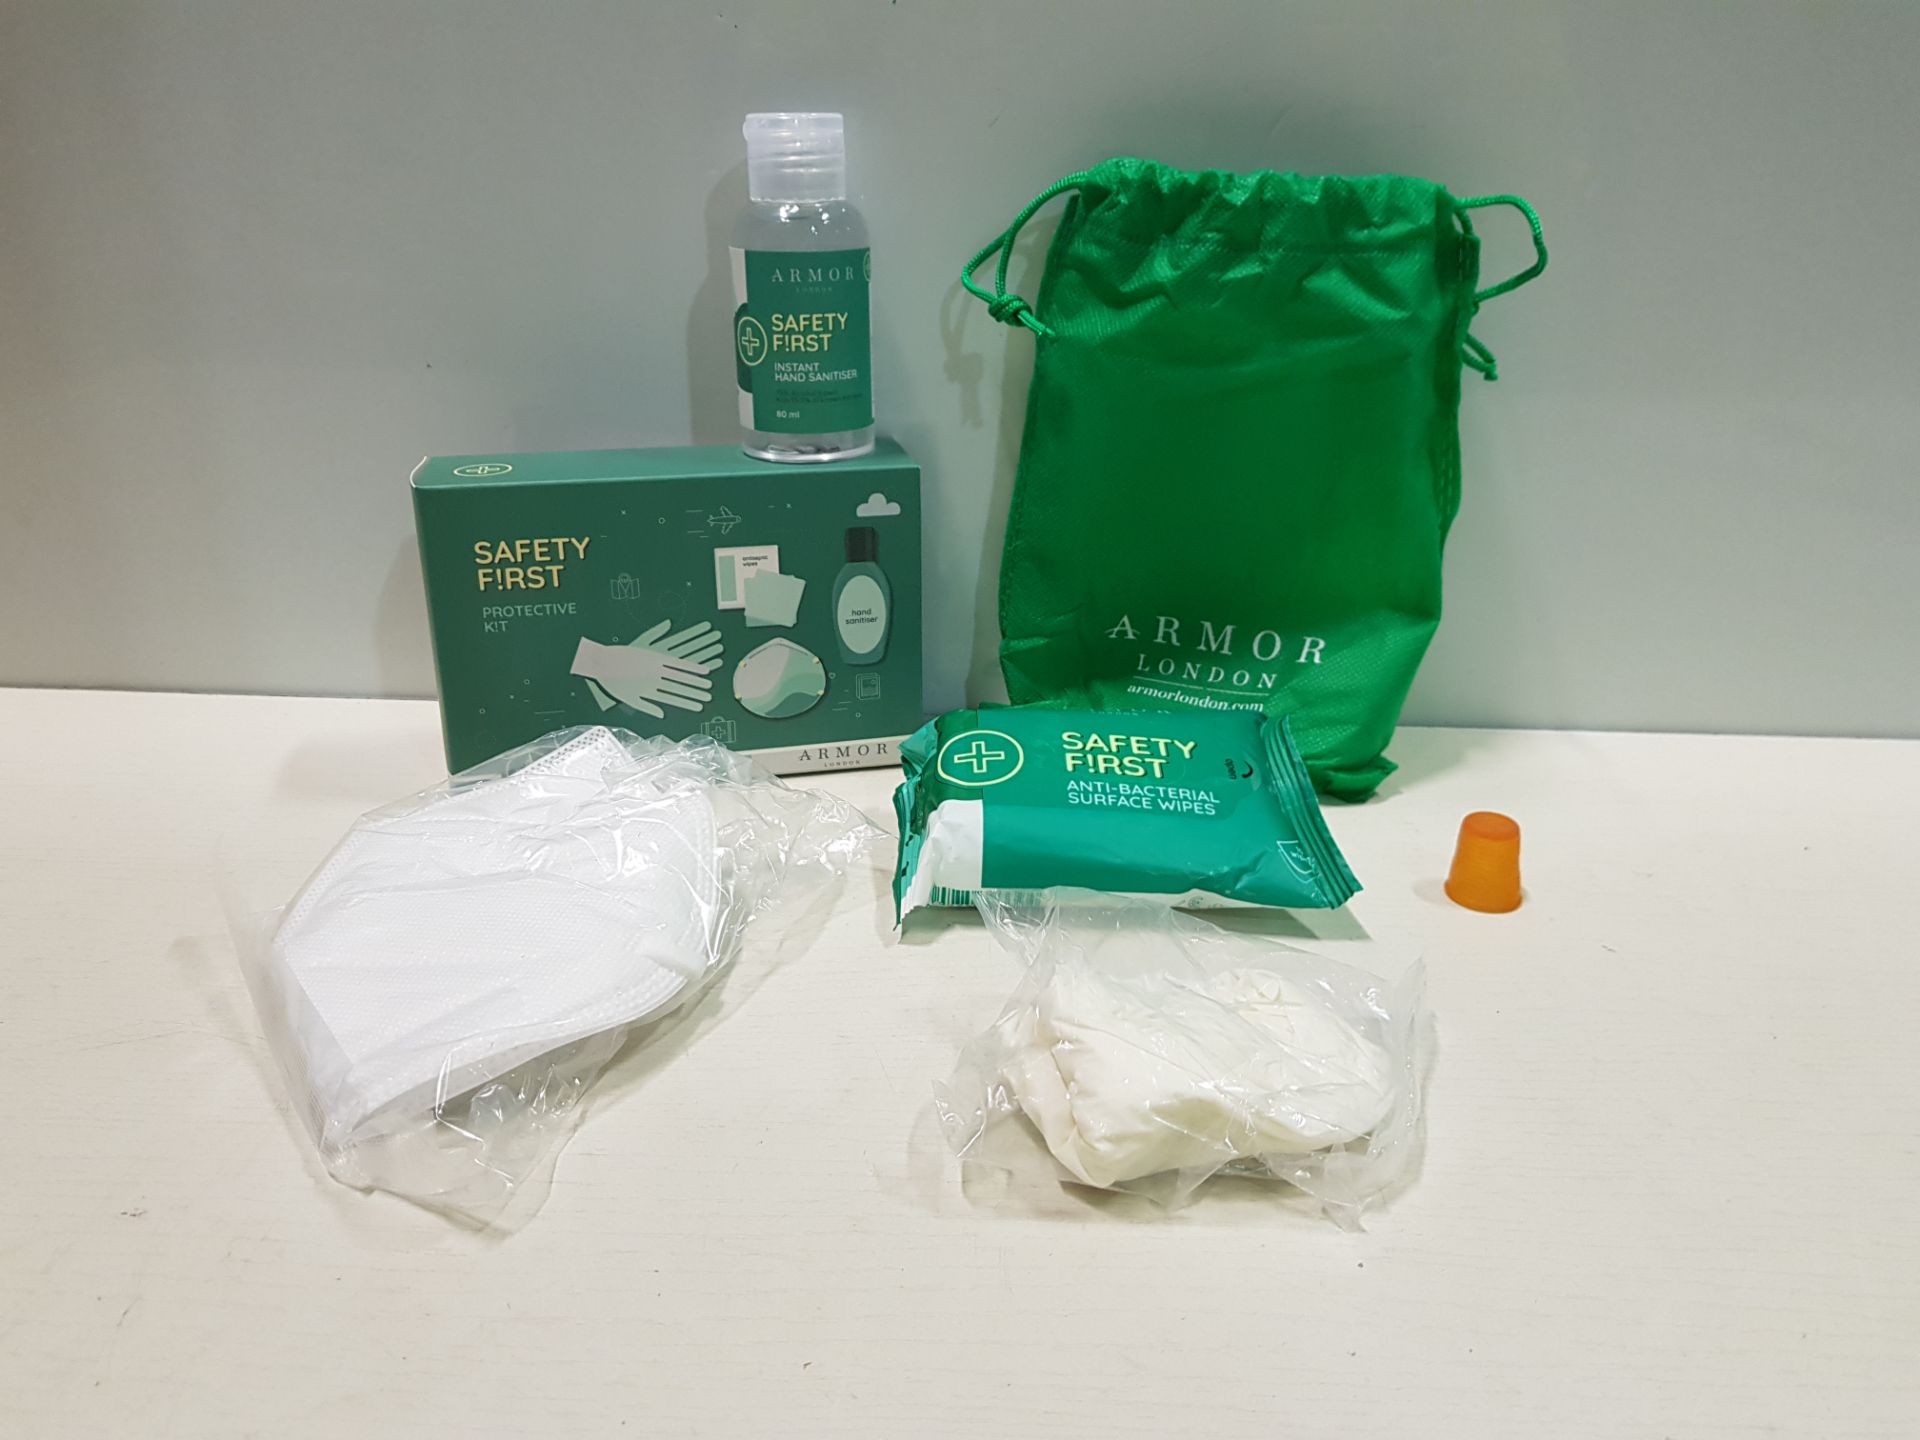 100 X BRAND NEW ARMOR LONDON SAFETY FIRST PROTECTIVE KITS INCLUDING GLOVES, HAND SANITISER,